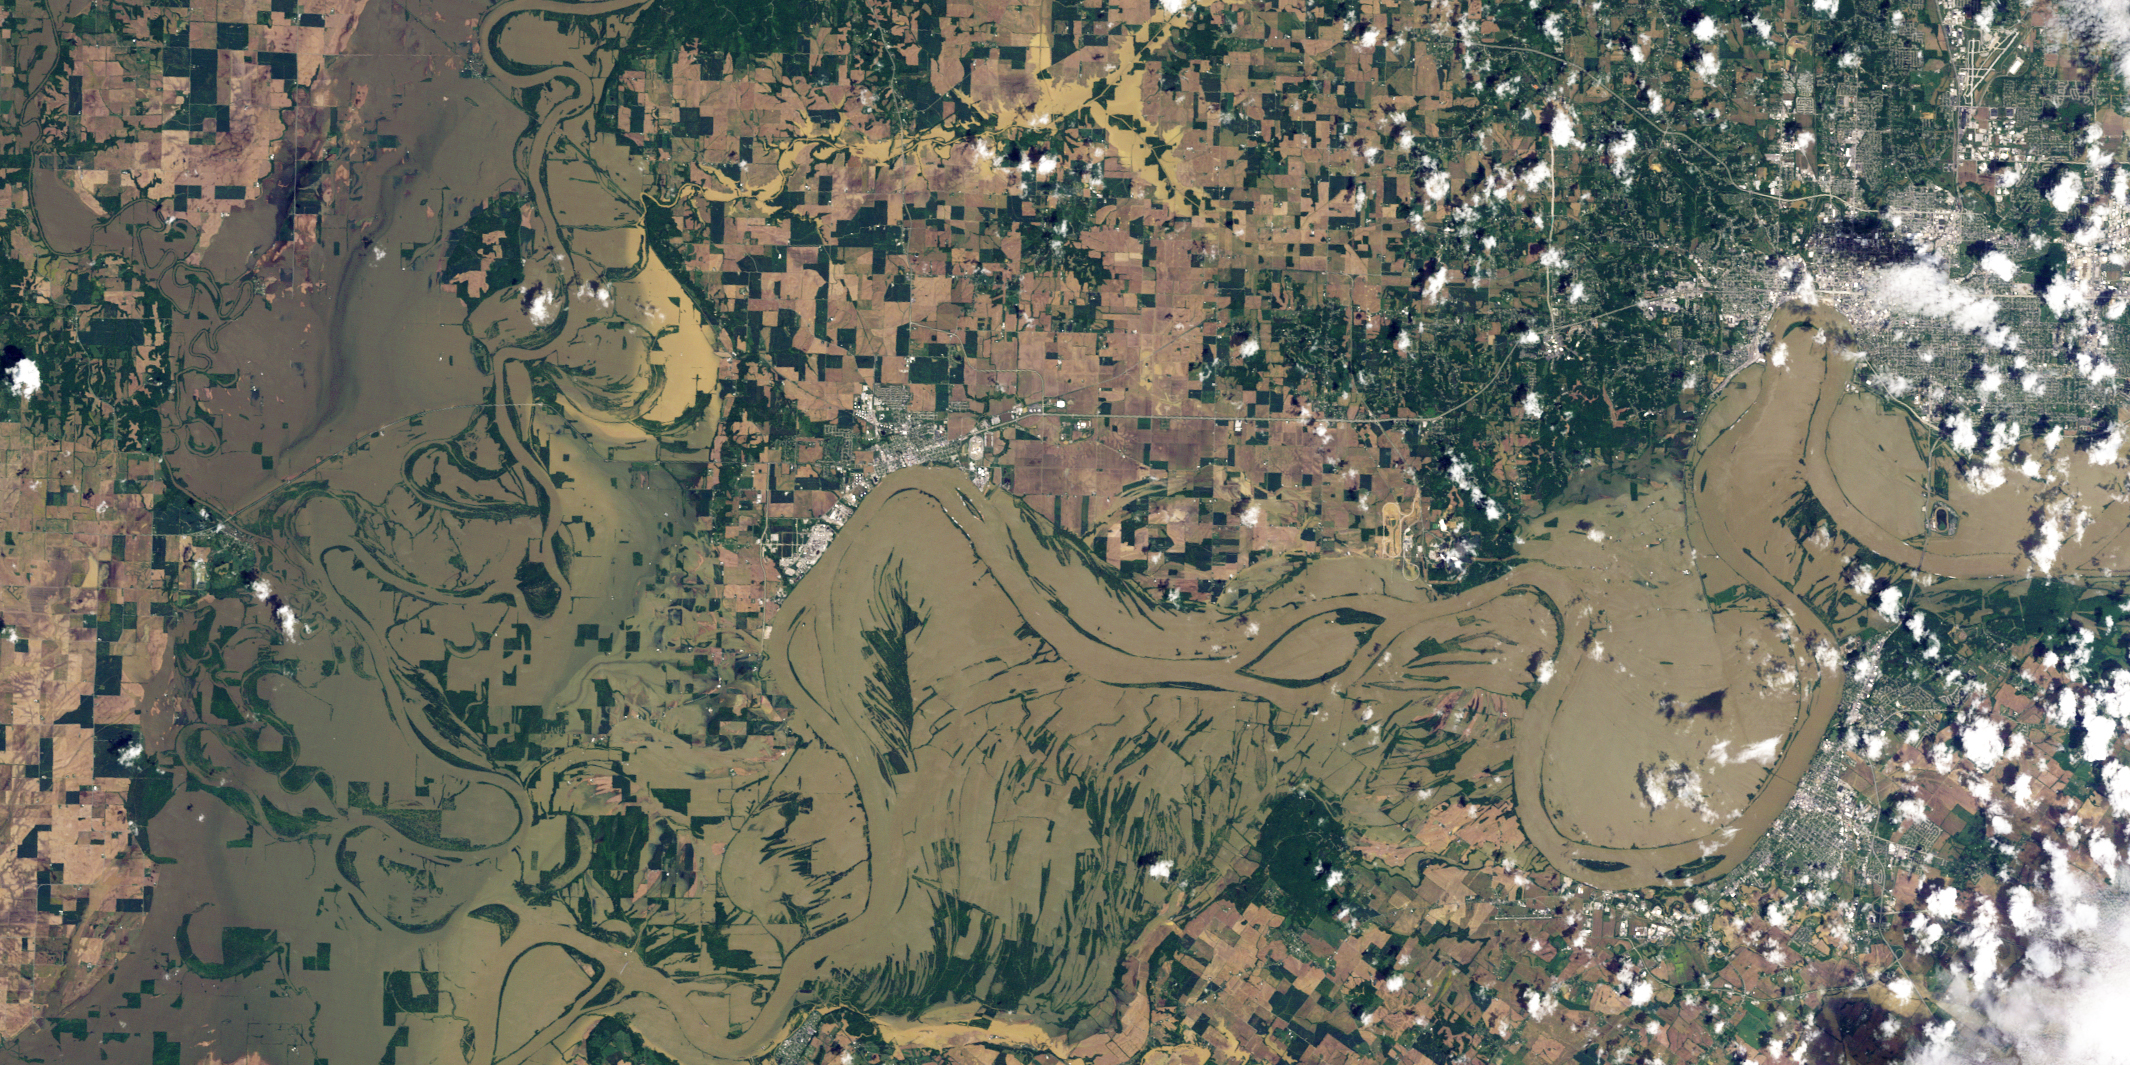 Floodwaters Recede along Wabash and Ohio Rivers - related image preview